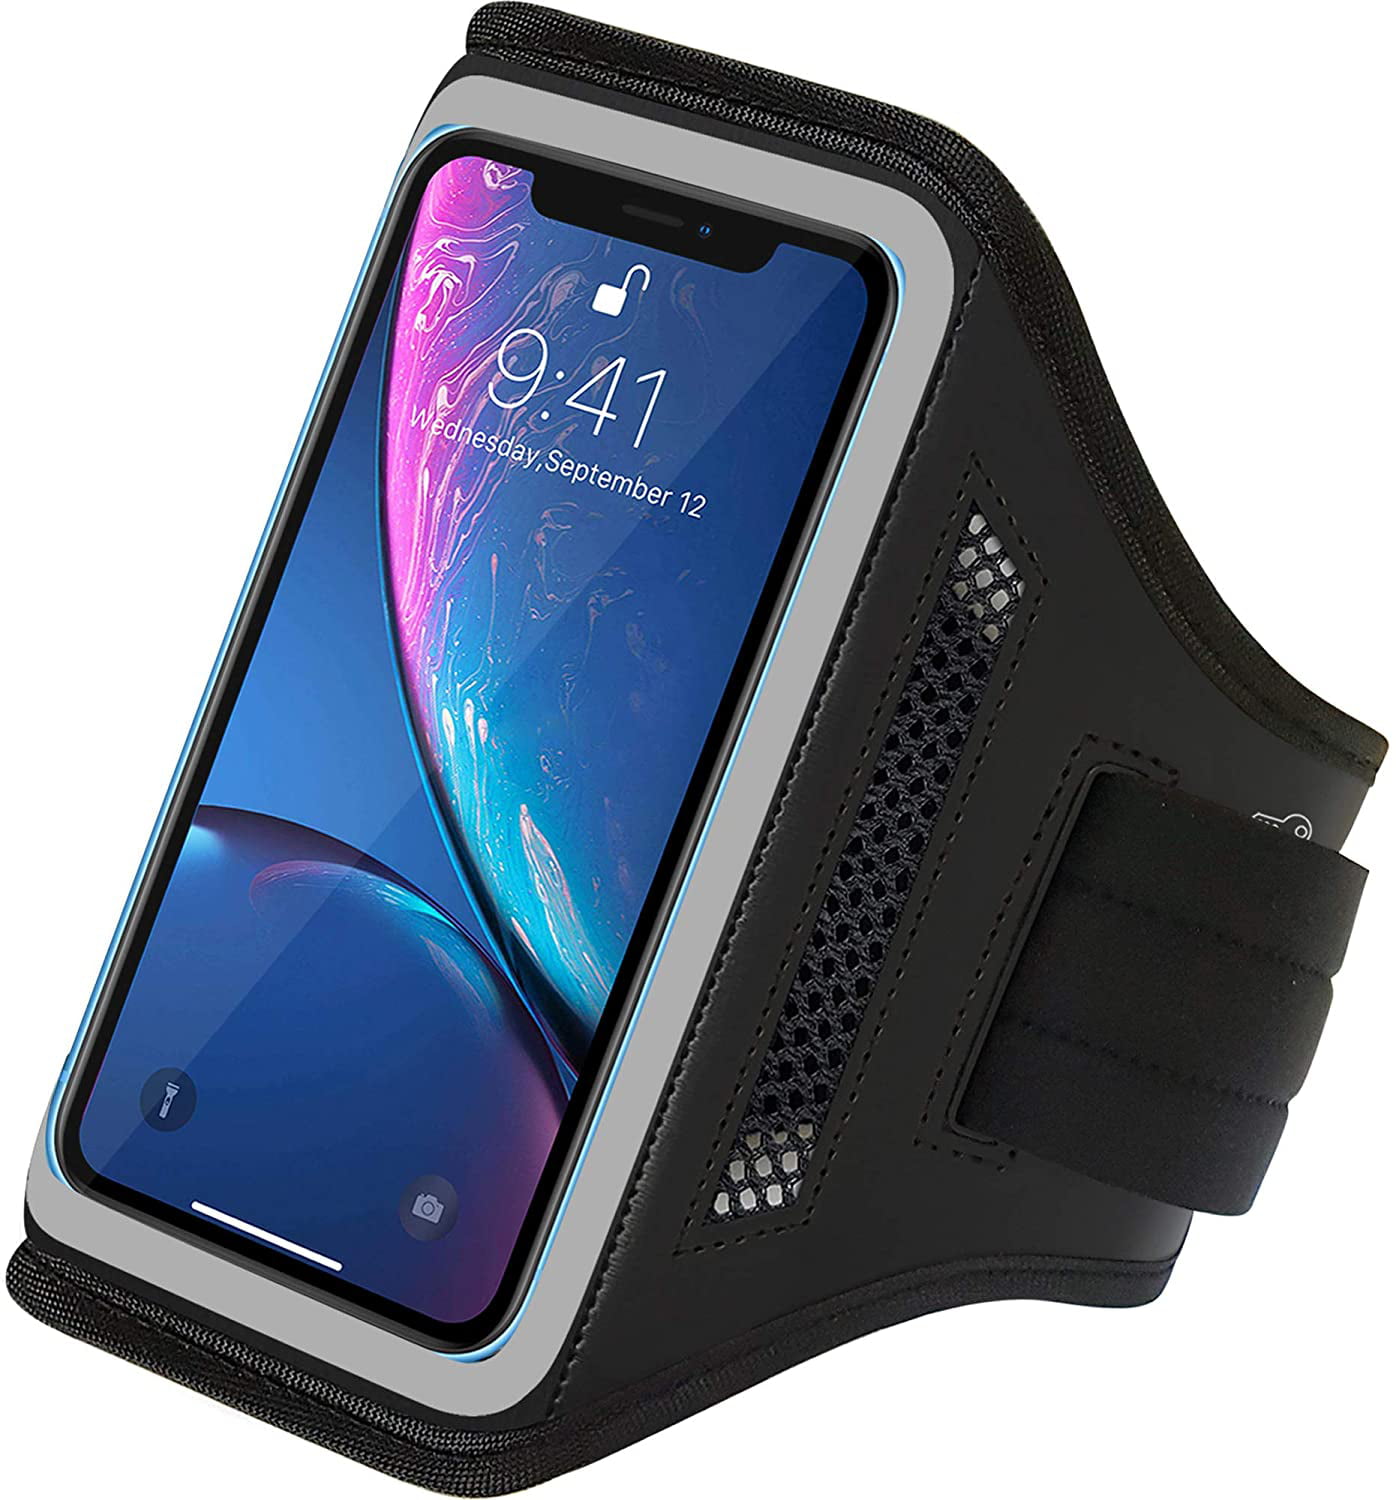 11Pro JEMACHE Water Resistant Gym Workouts Running Arm Band Case for iPhone X X Blue XS iPhone 12 12Pro with Card Holder 12 Pro 12 11 Pro XS Armband 